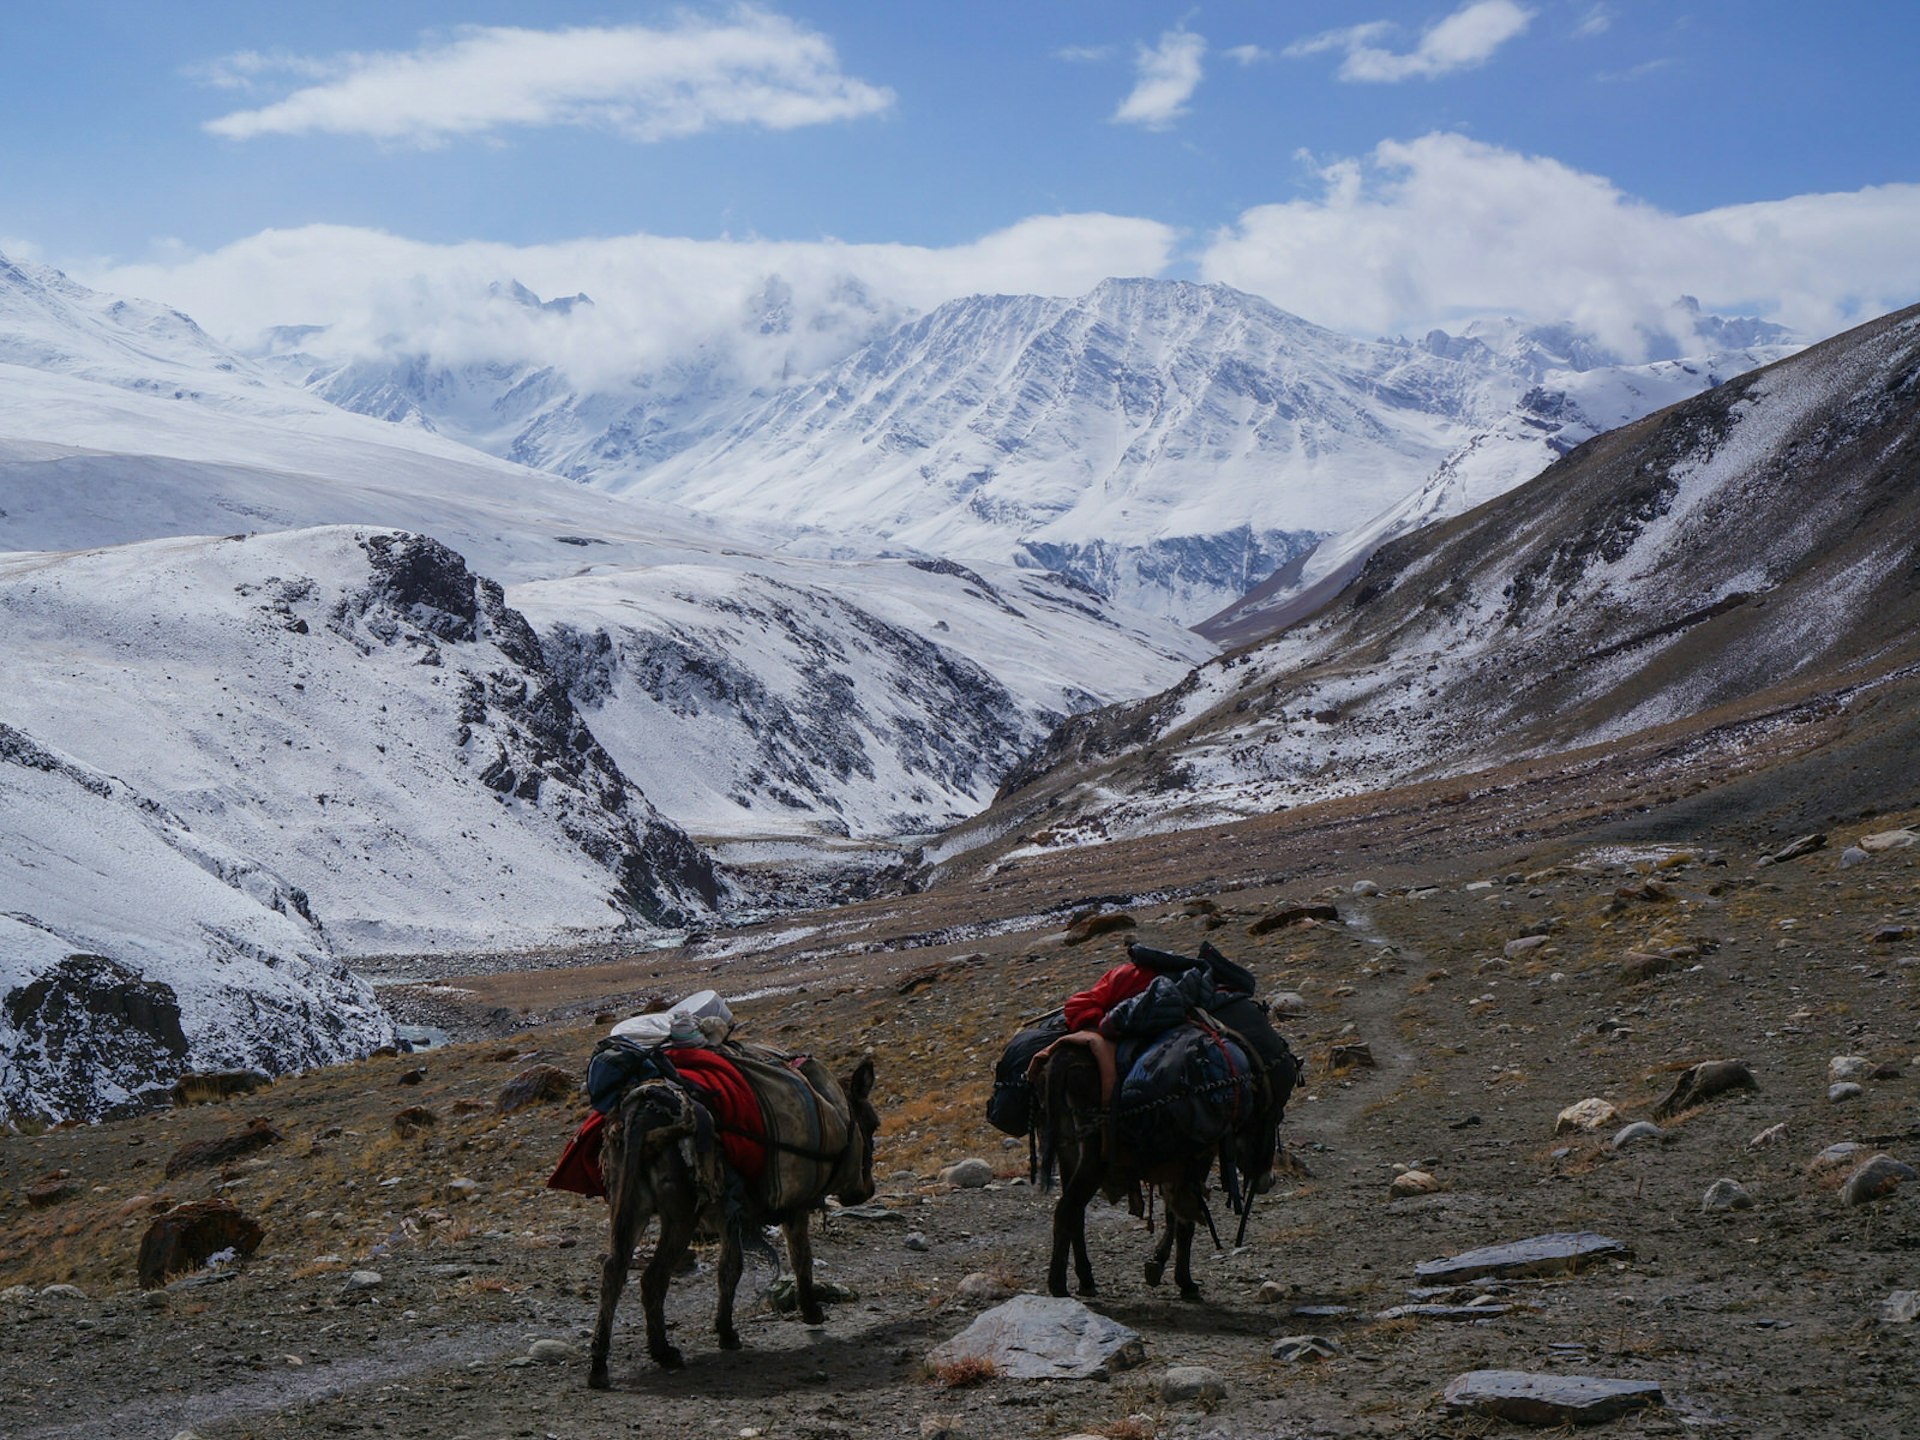 Two donkeys carrying gear in the foreground with snowy mountains in the background